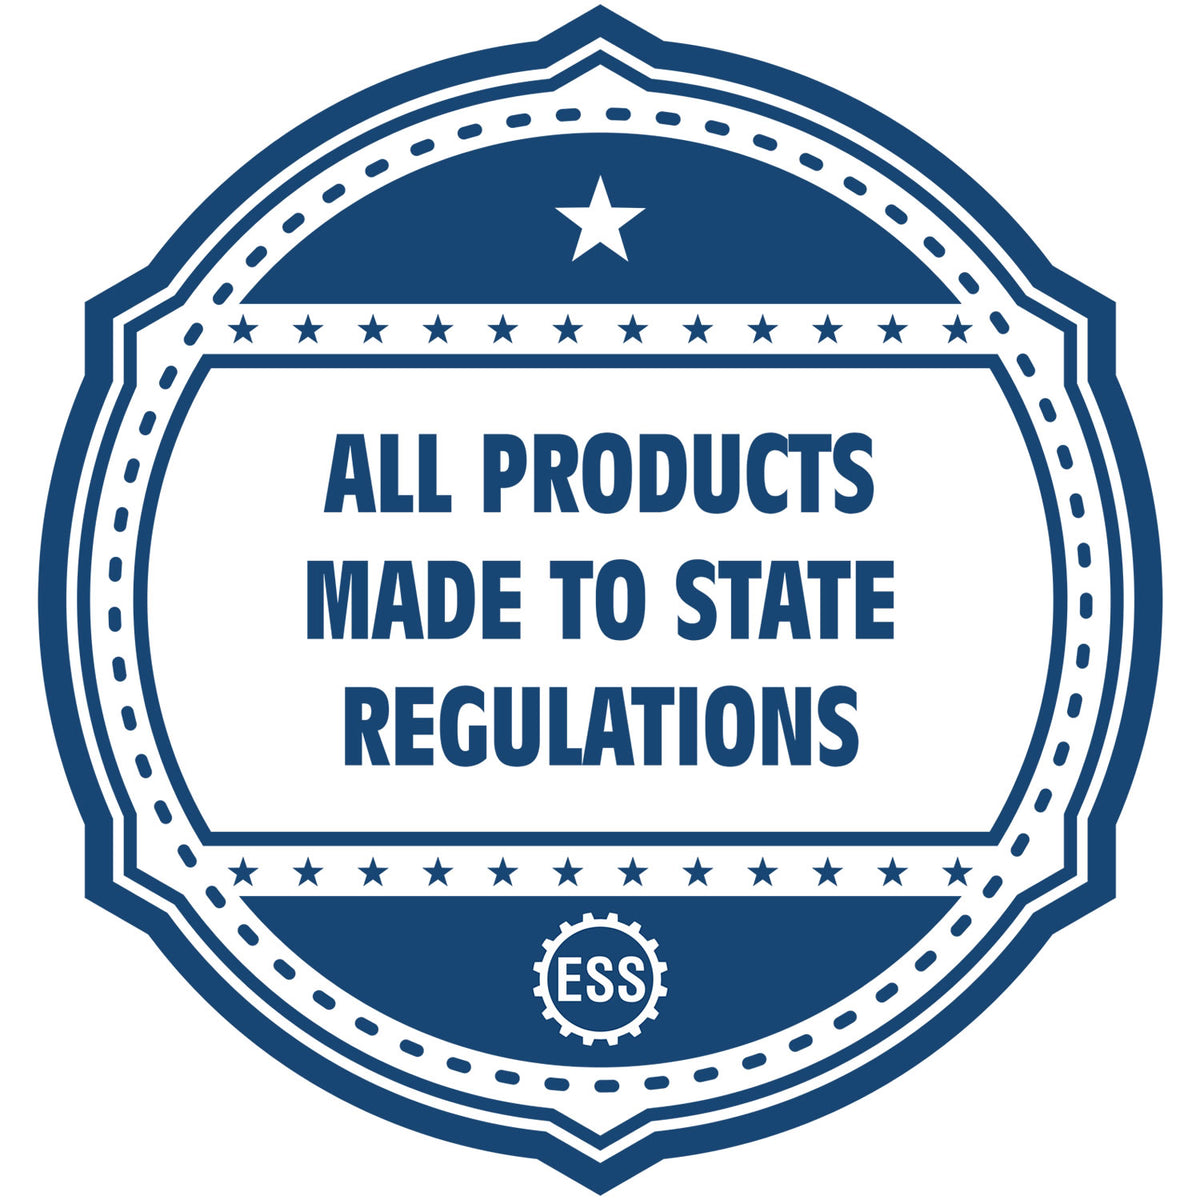 An icon or badge element for the West Virginia Landscape Architectural Seal Stamp showing that this product is made in compliance with state regulations.